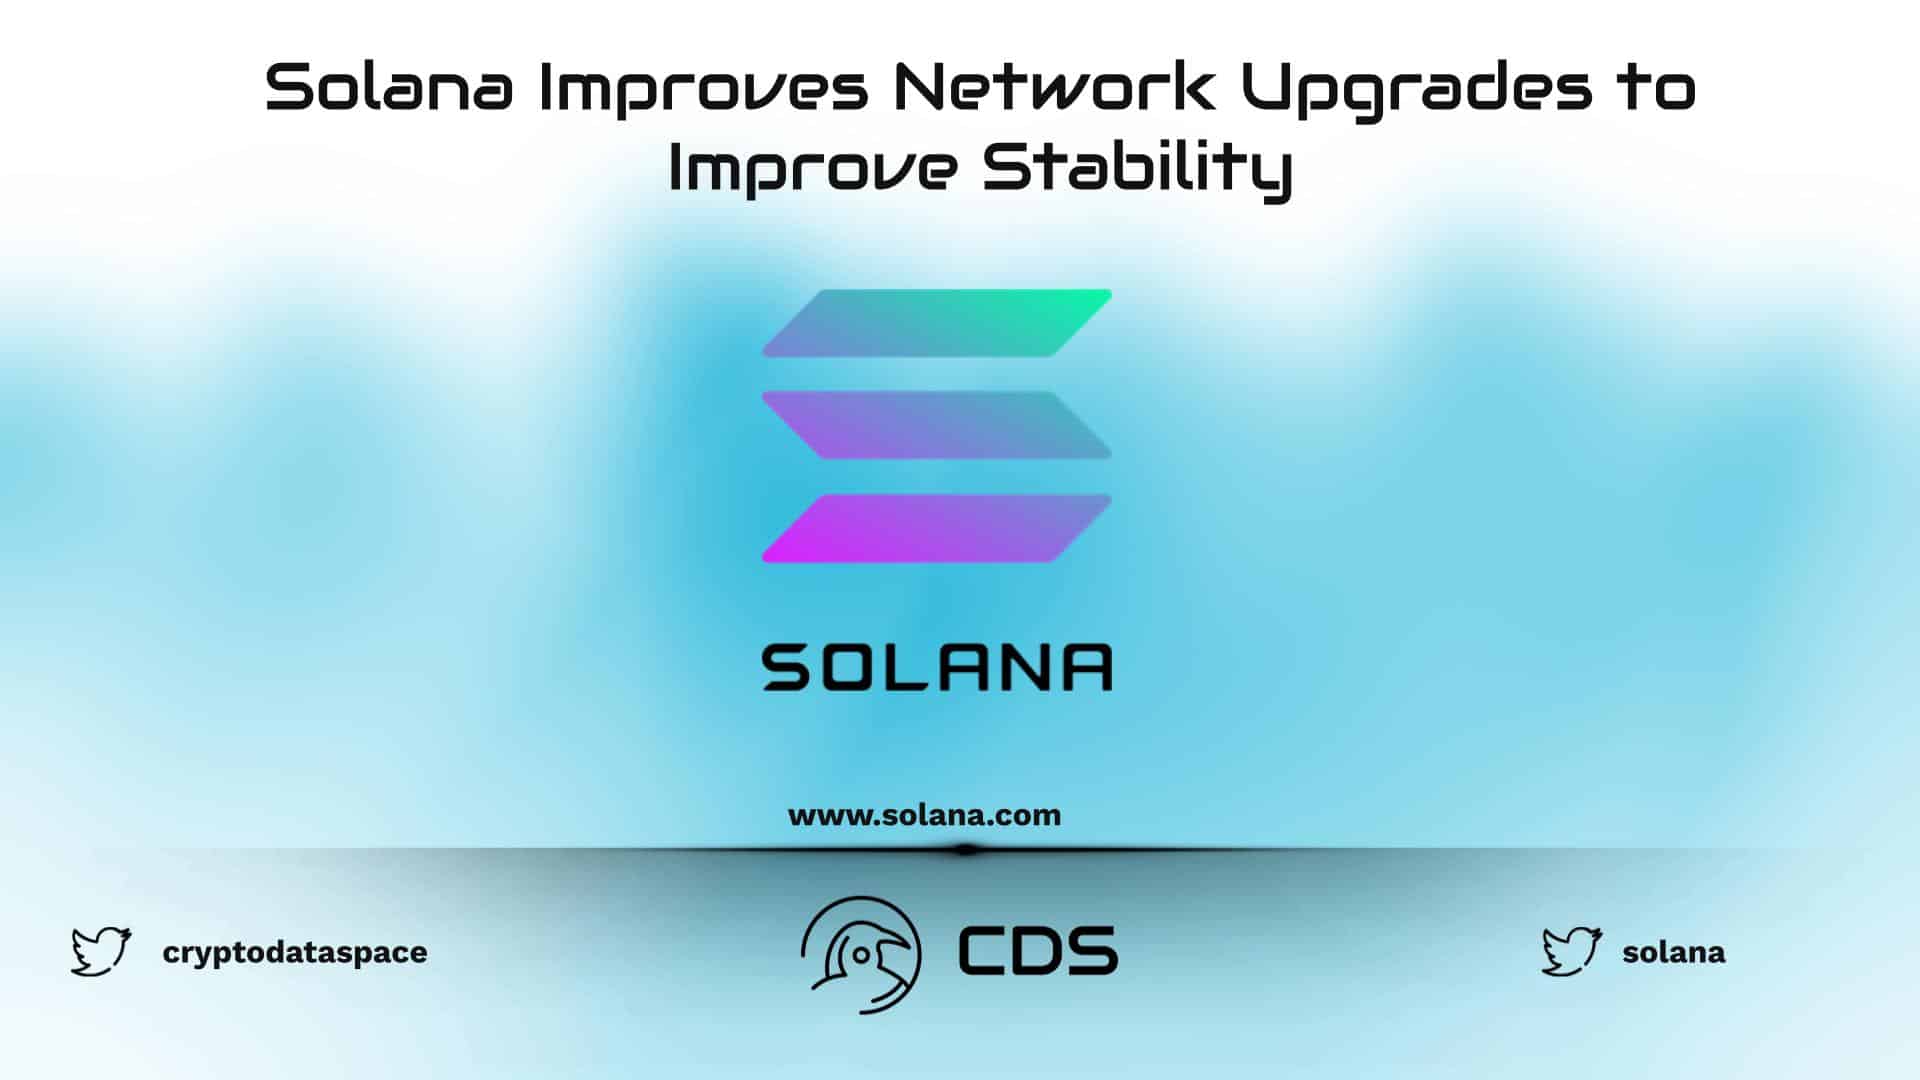 Solana Improves Network Upgrades to Improve Stability